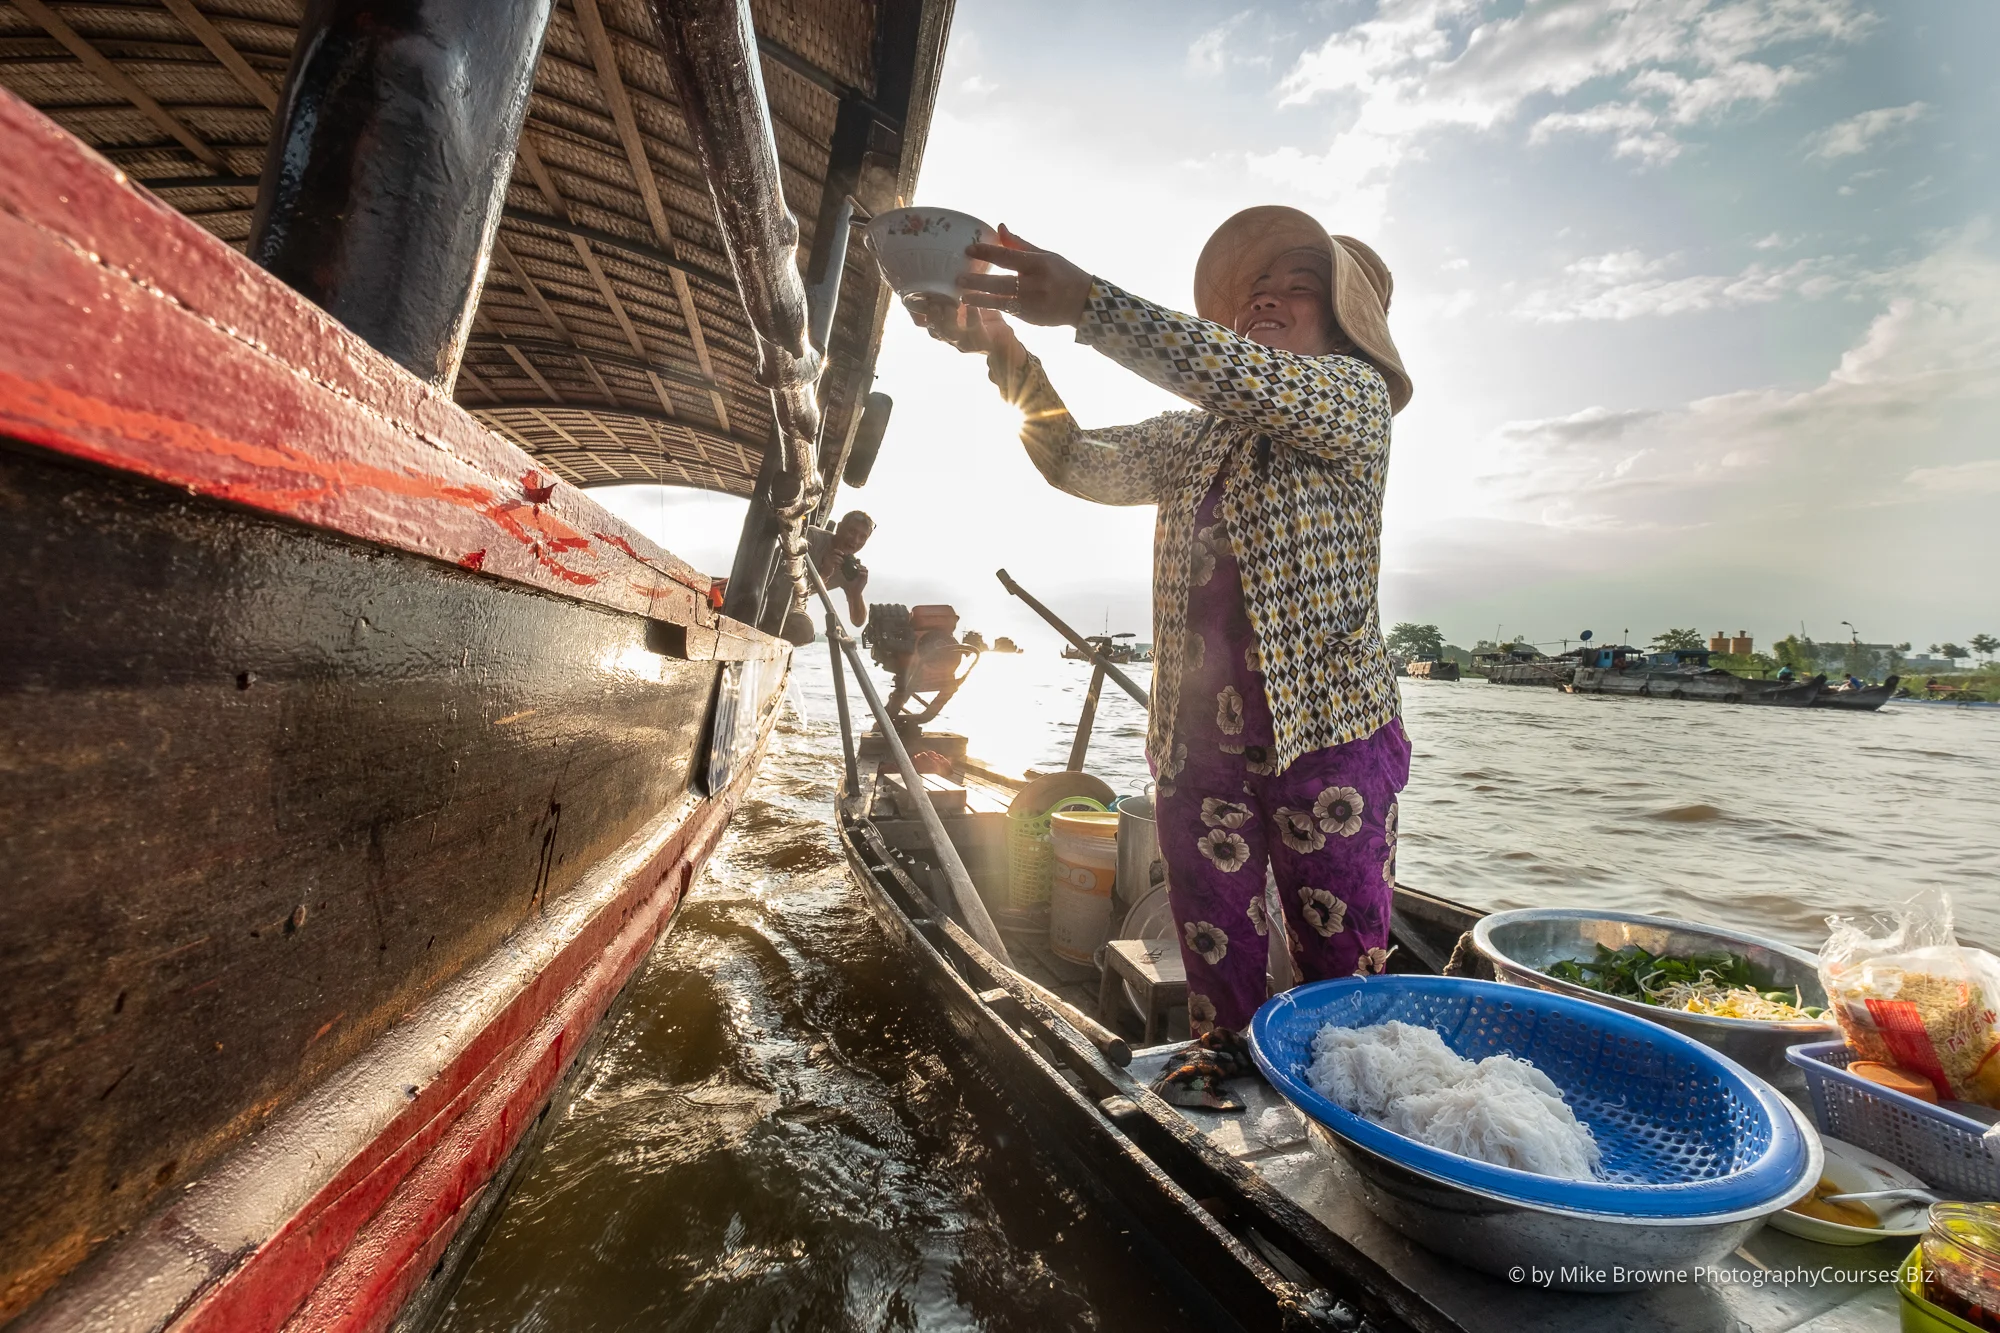 Woman standing in small boat passing food bowl up to another larger boat at Châu Đốc floating market, Vietnam